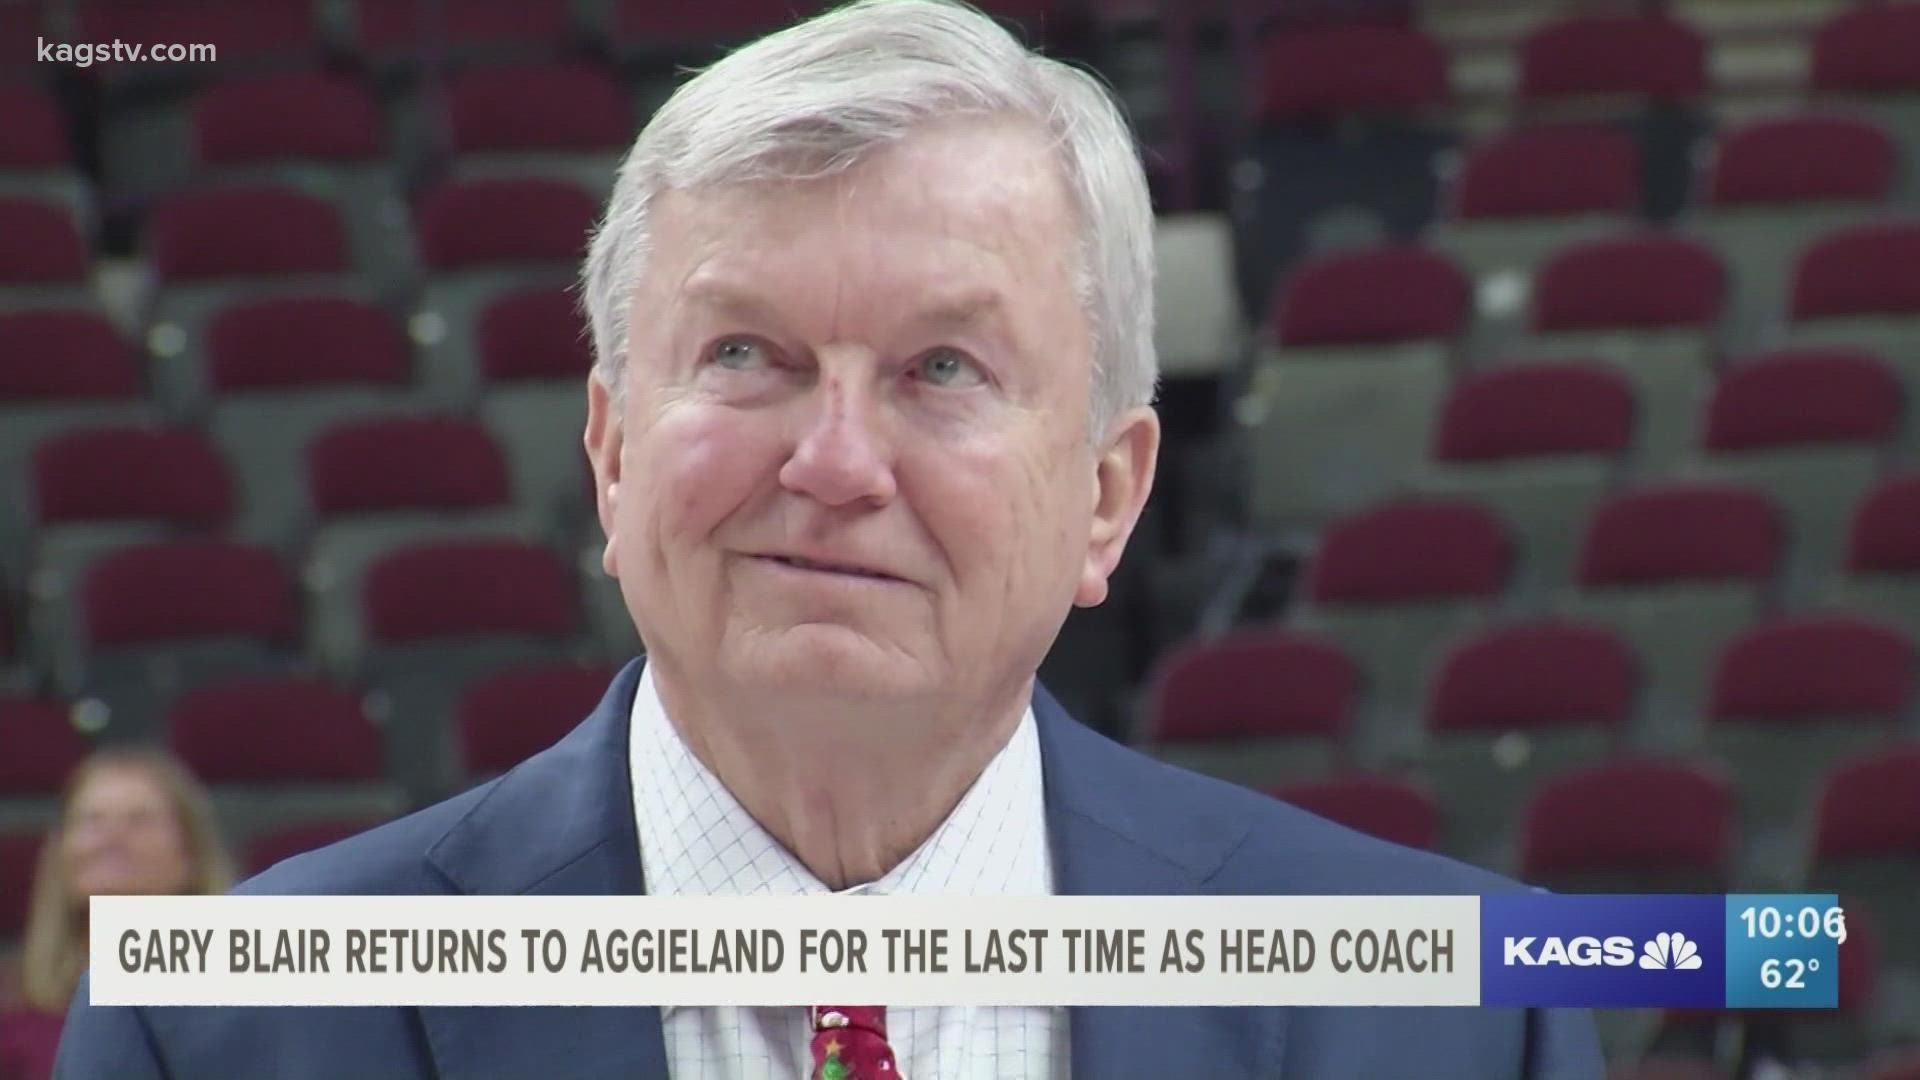 While he hangs up his professional coaching hat, Texas A&M Coach Gary Blair says he's still got plenty to do.